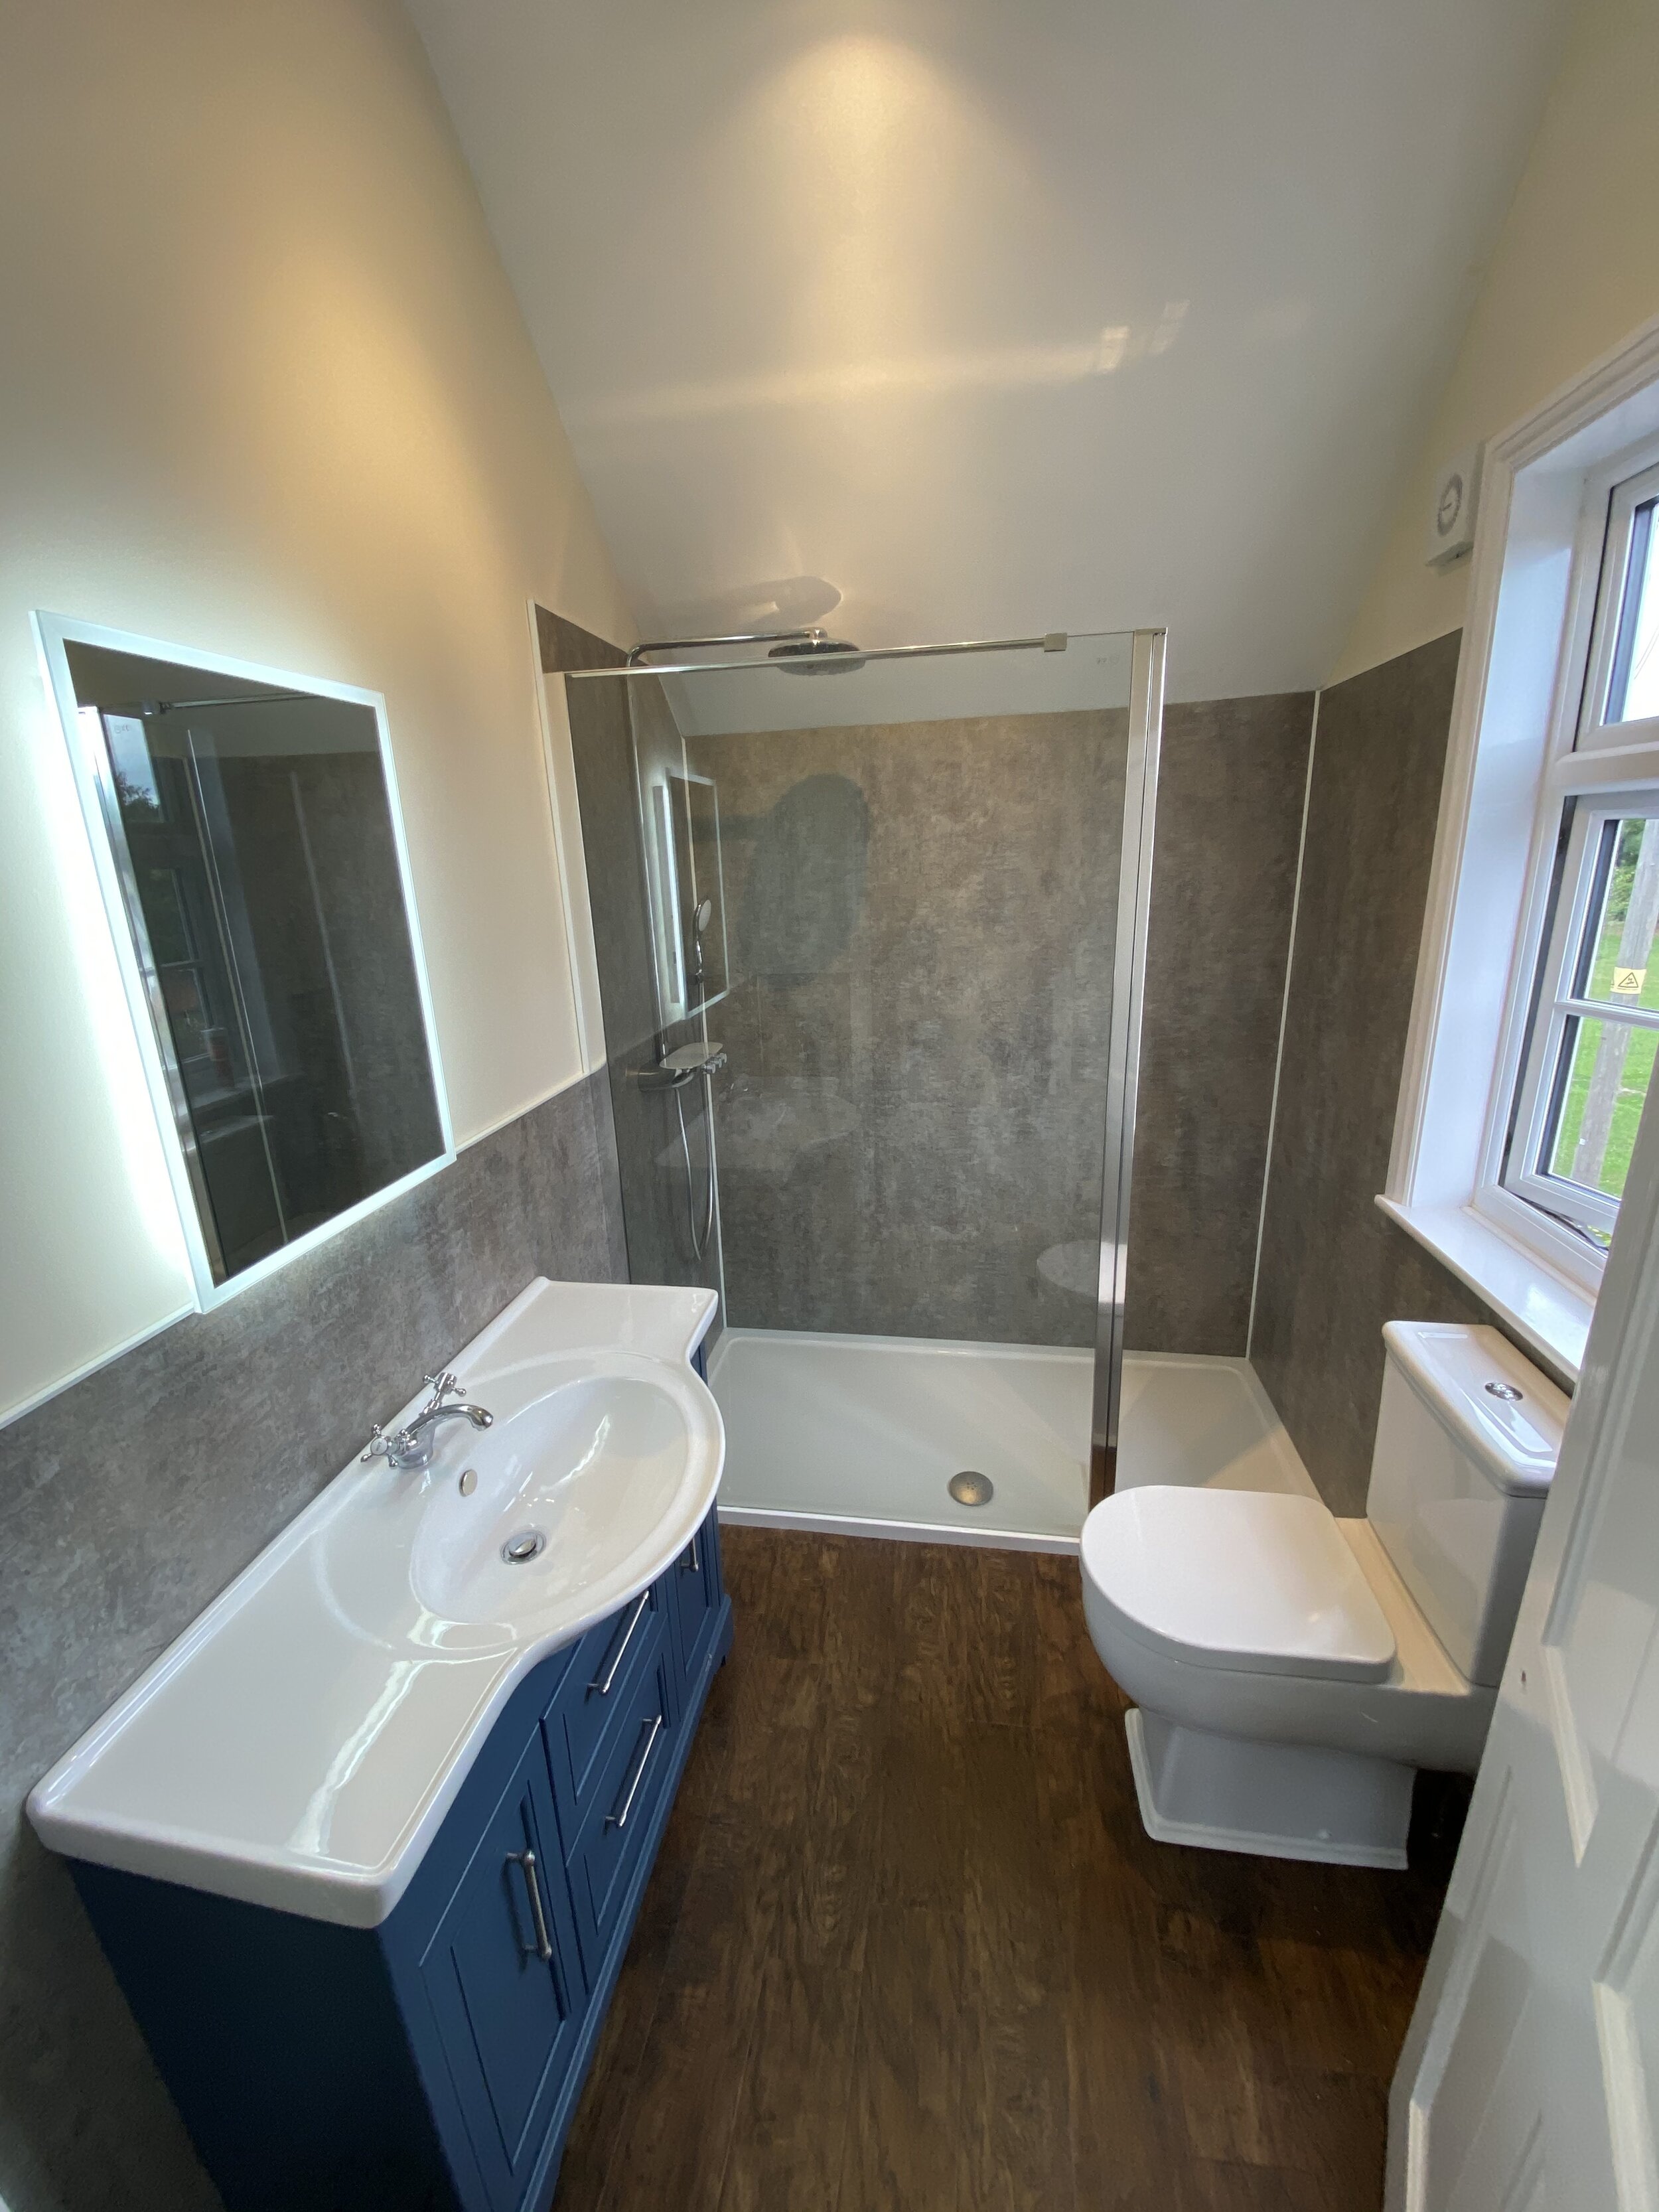 Previous bathroom project with shower cubicle